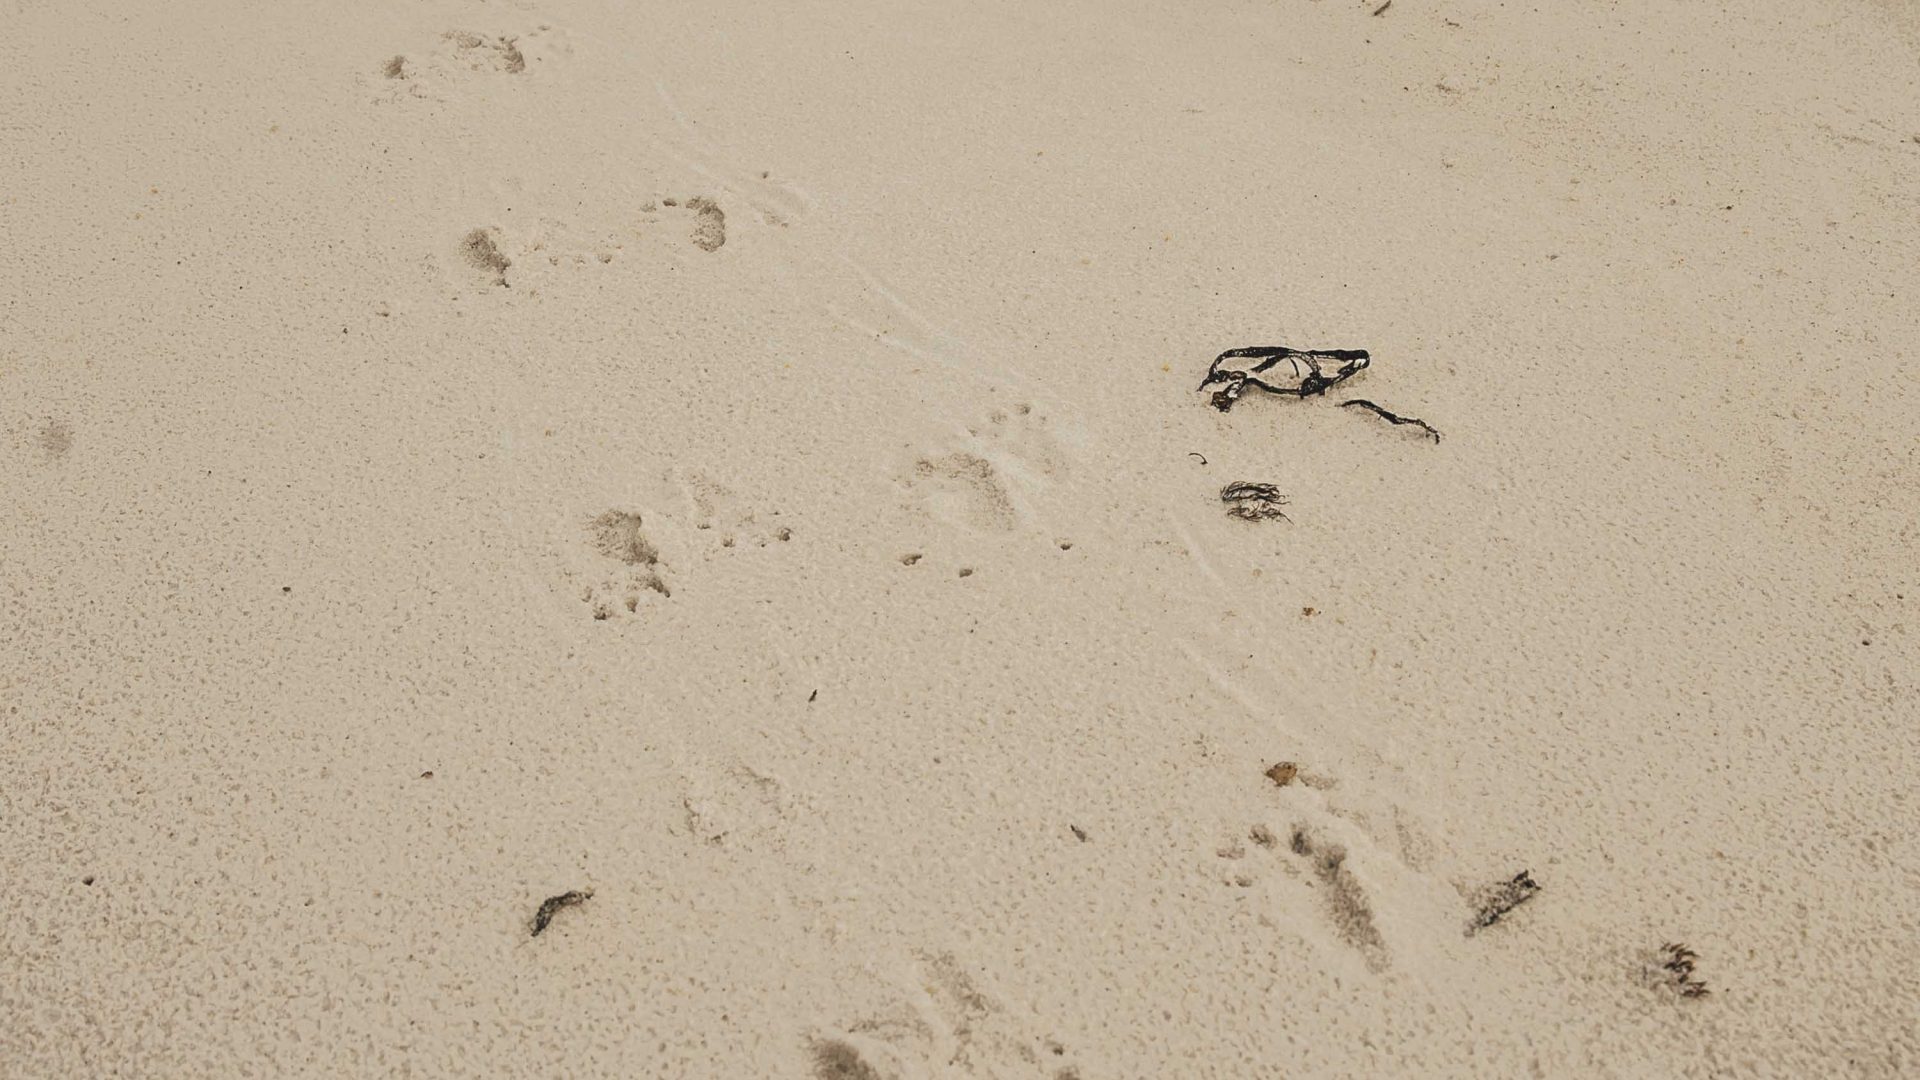 Animal tracks in the sand.